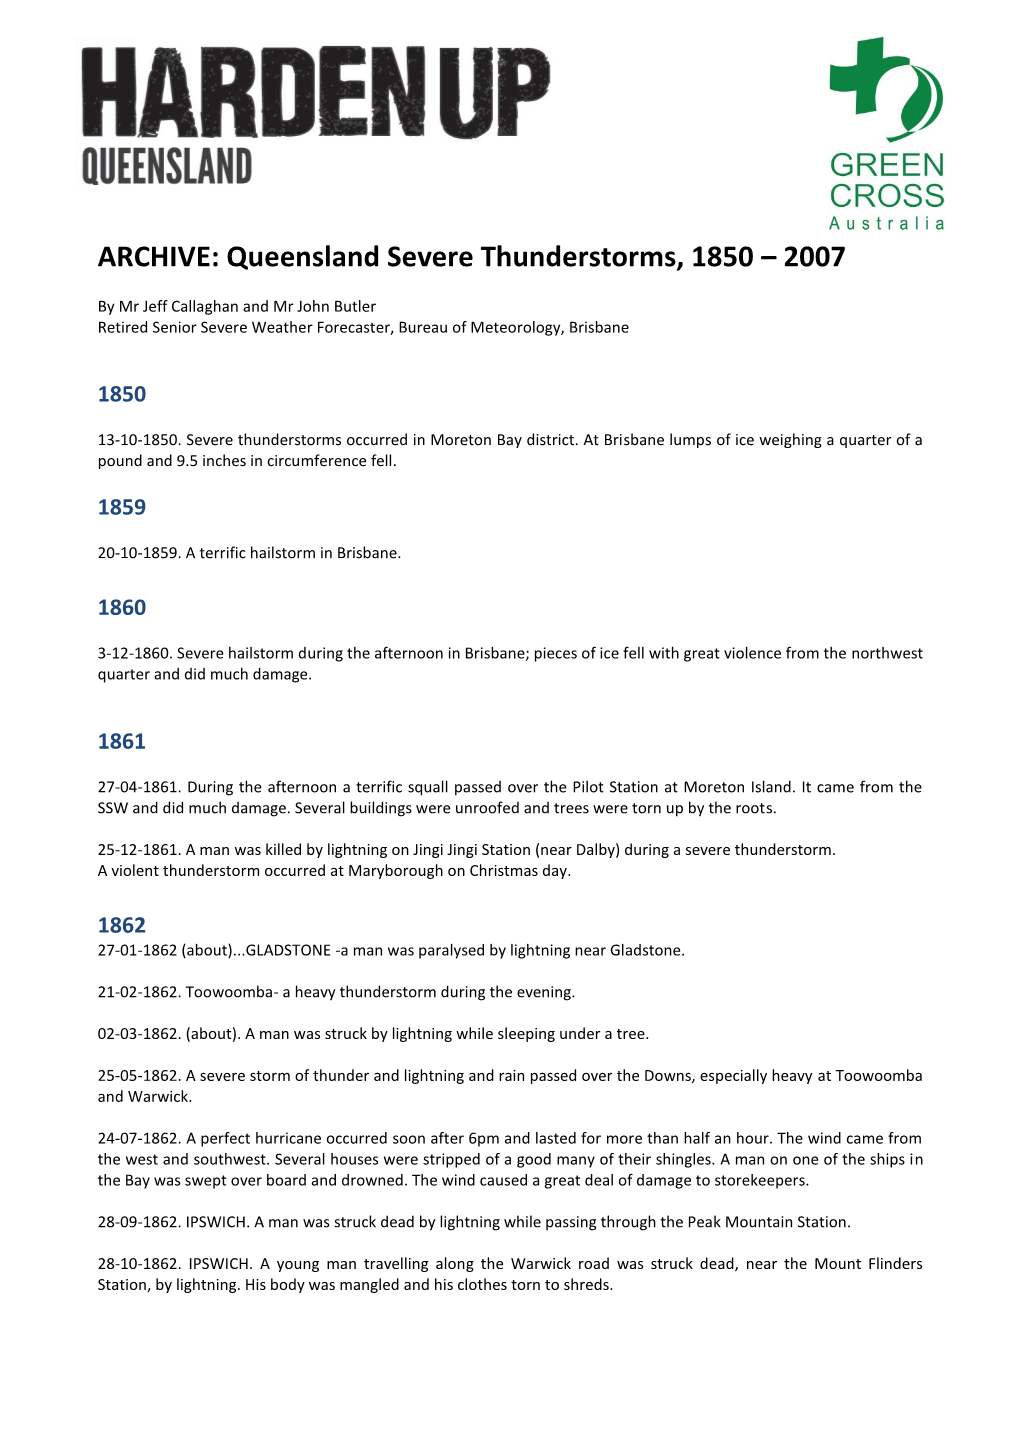 ARCHIVE: Queensland Severe Thunderstorms, 1850 – 2007